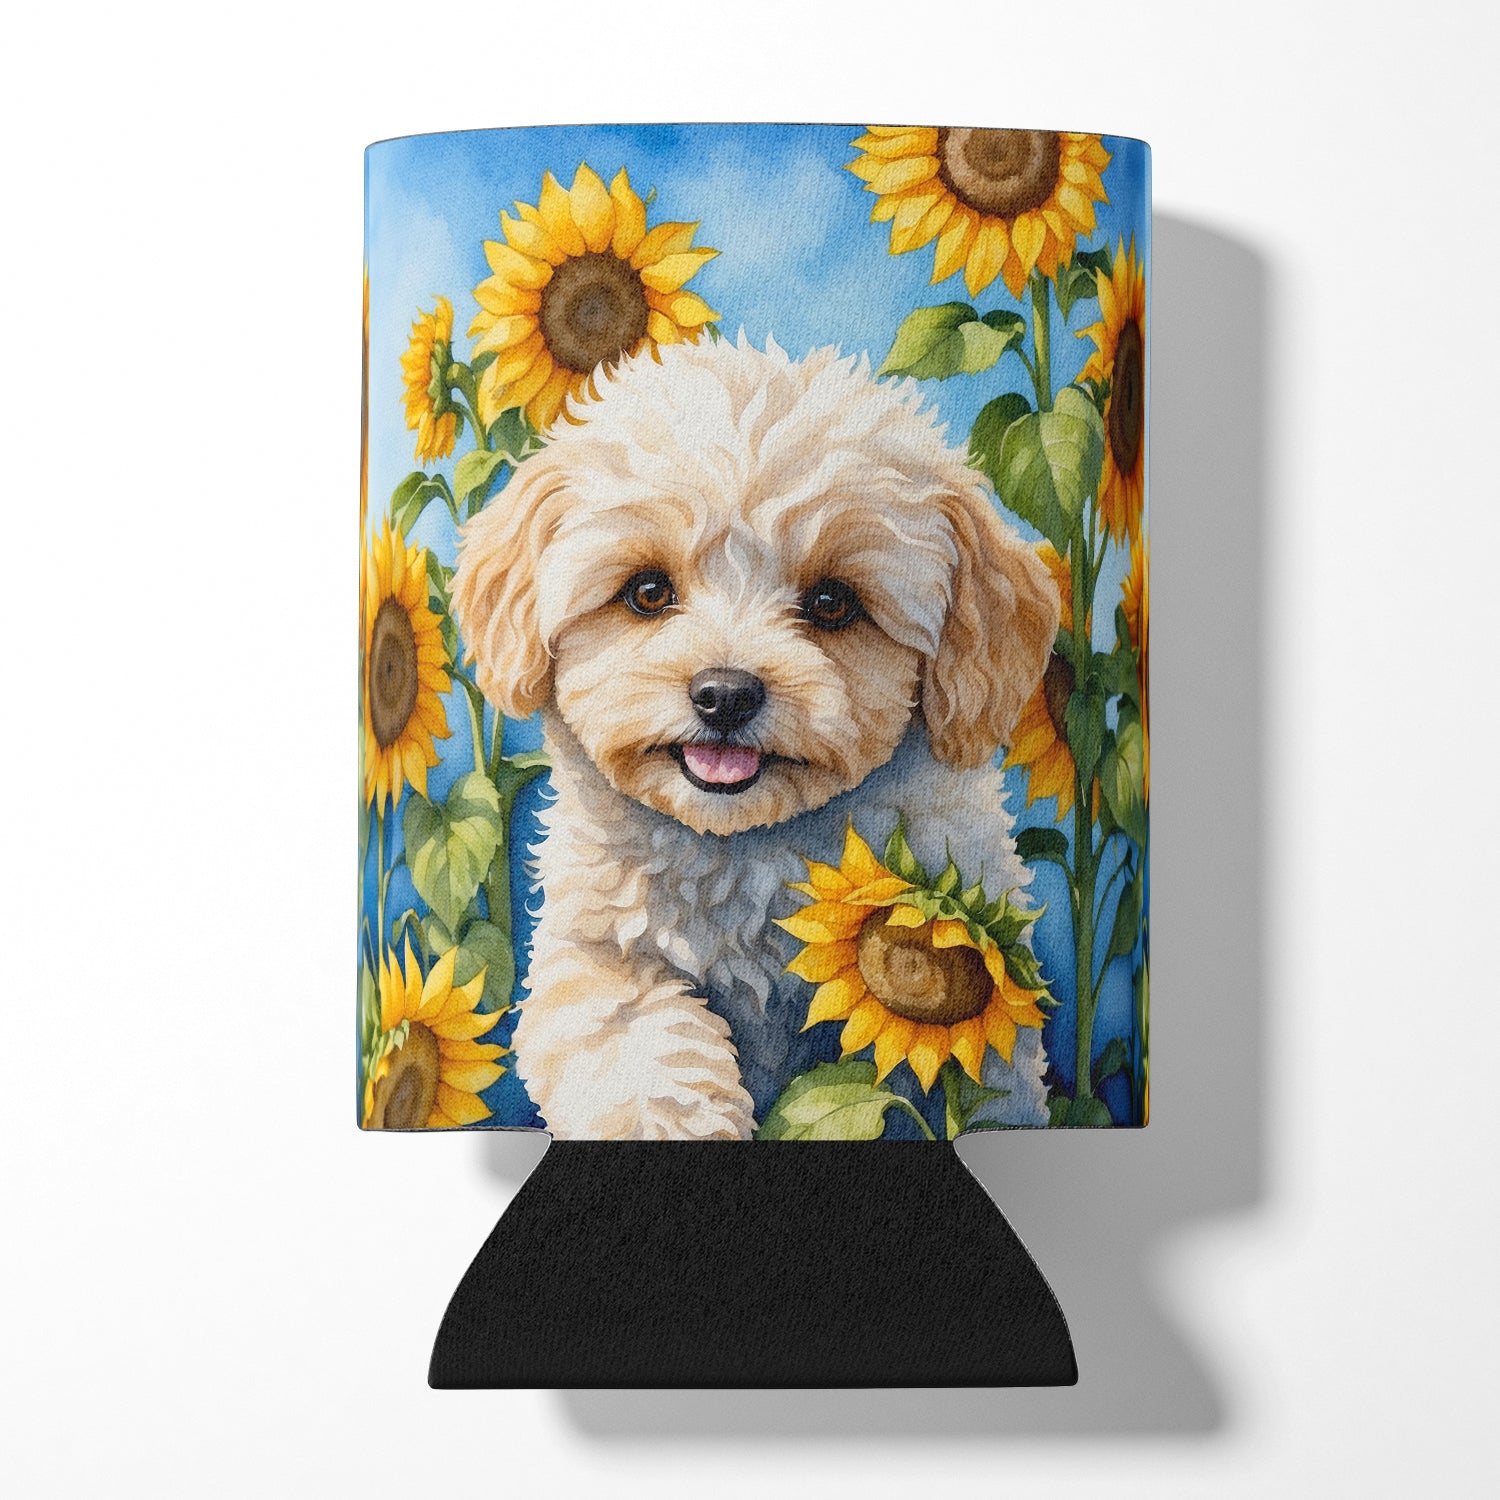 Buy this Maltipoo in Sunflowers Can or Bottle Hugger